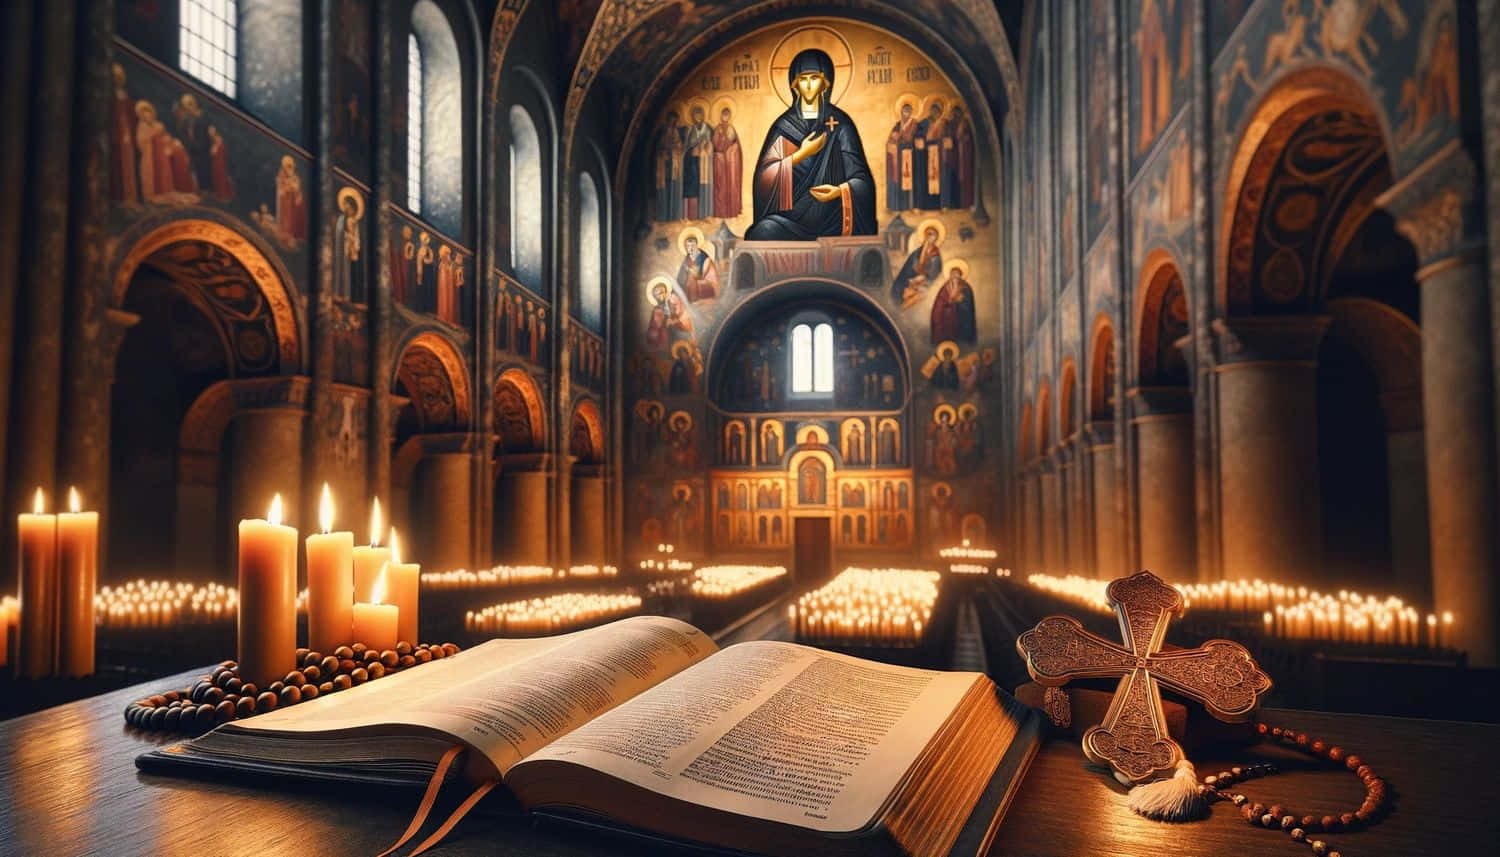 Orthodox_ Church_ Interior_with_ Icons_and_ Candles.jpg Wallpaper